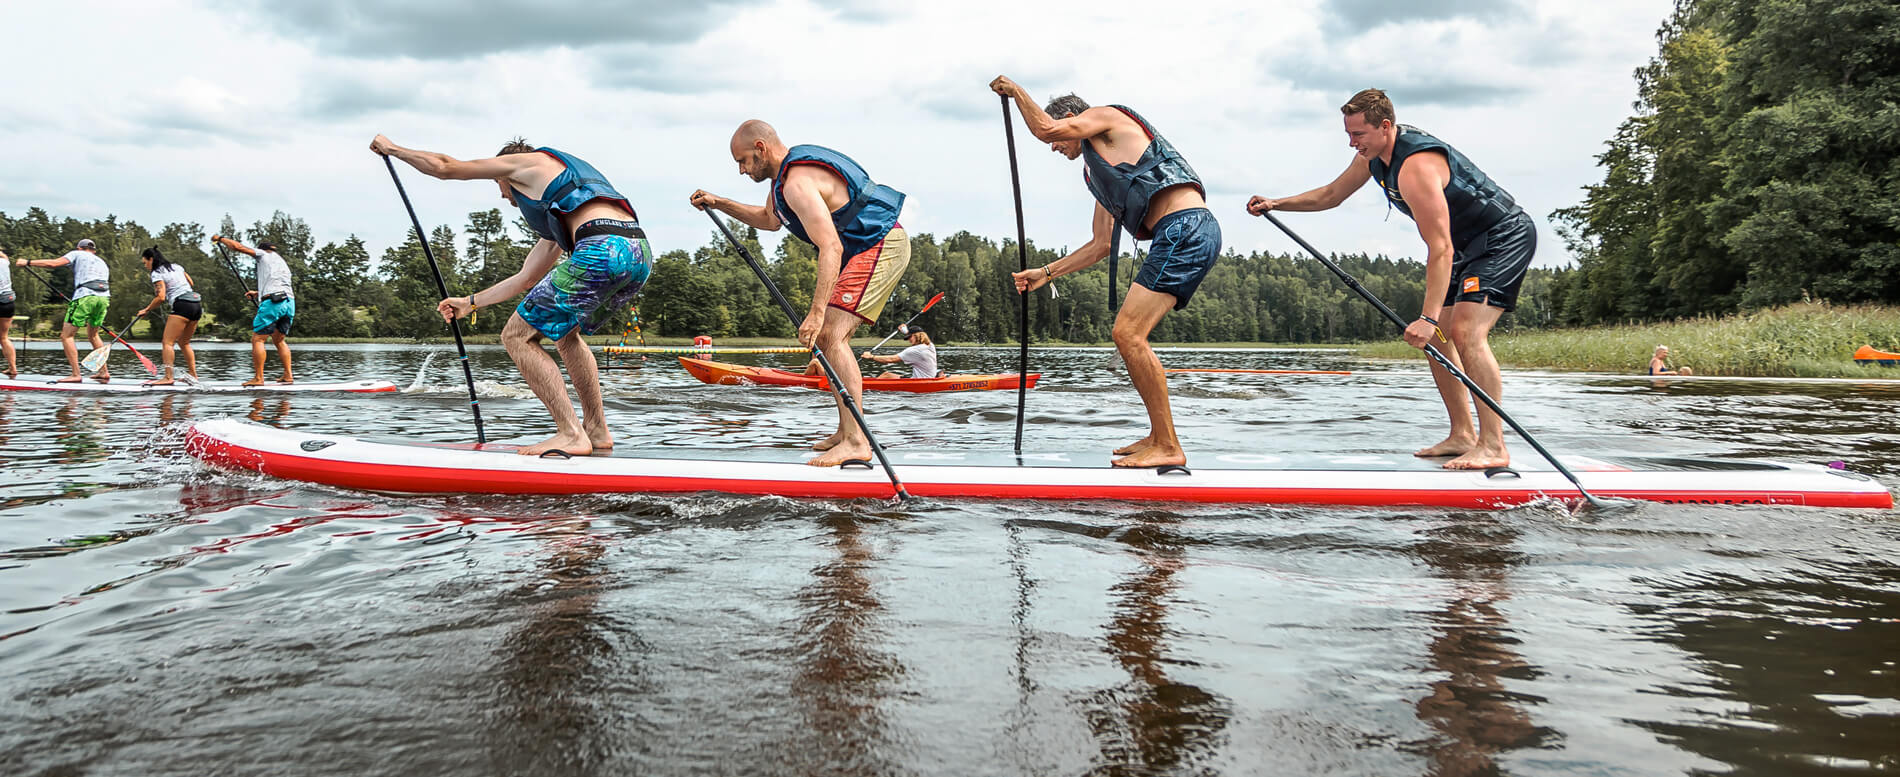 getting started with SUP racing